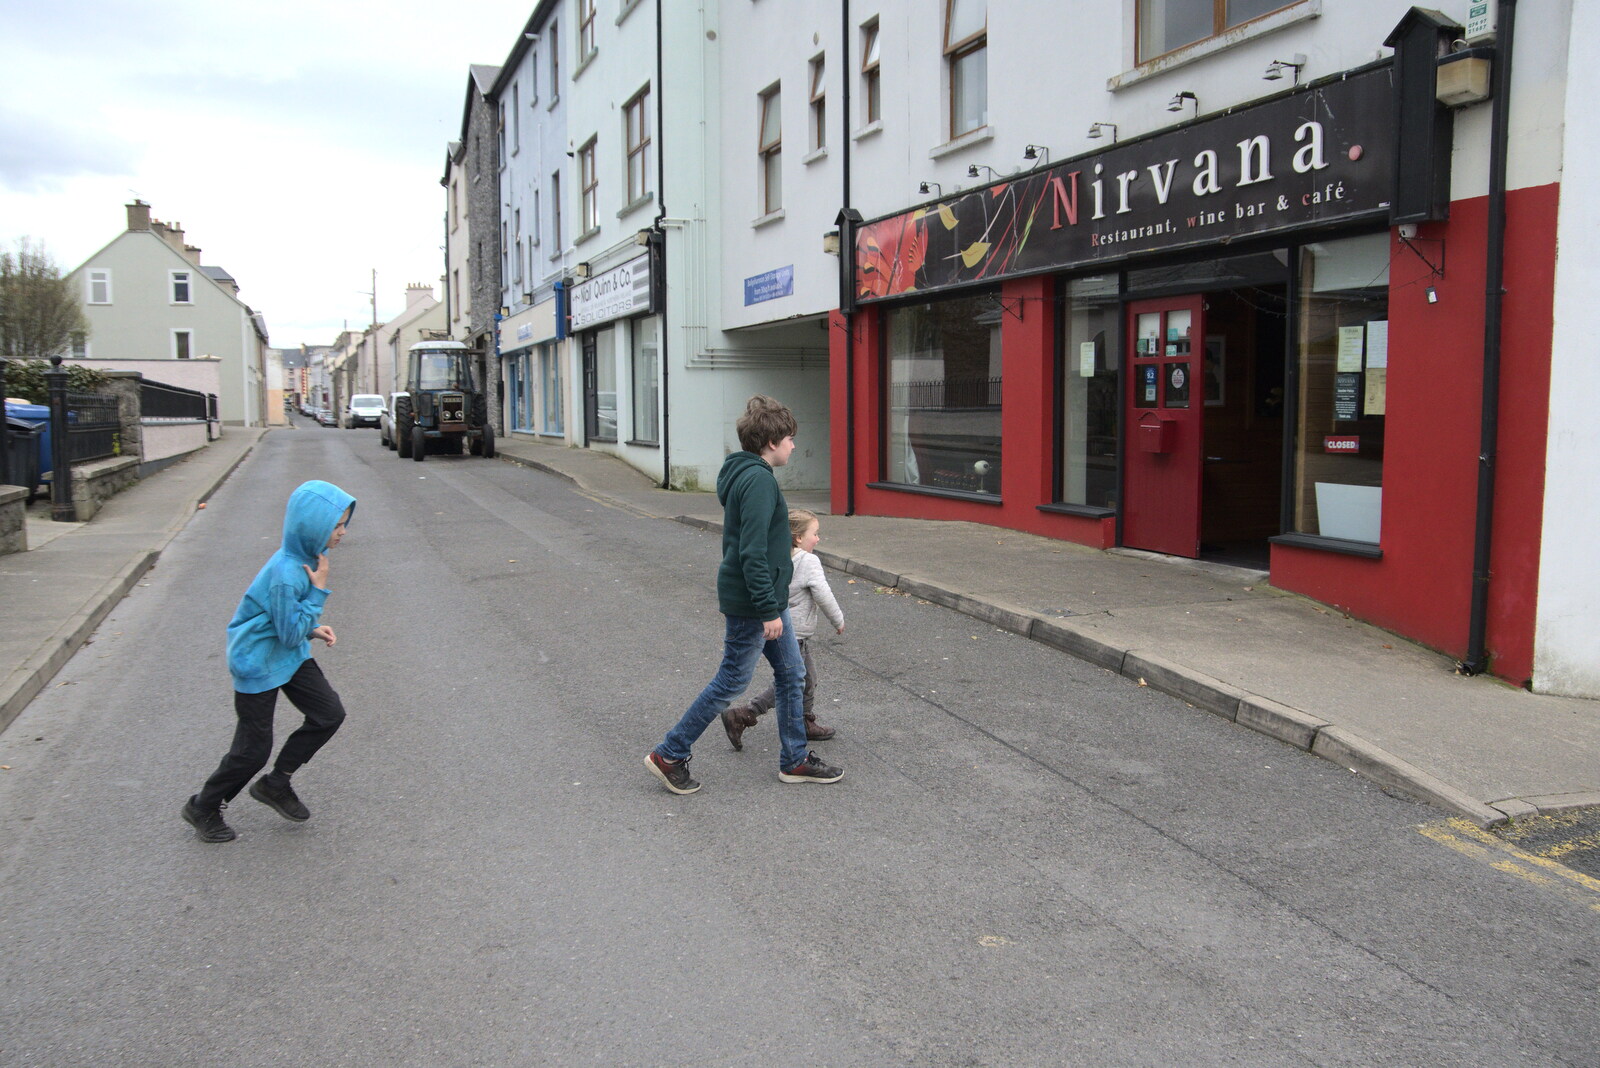 Harry, Fred and Ra-ra cross the road from Manorhamilton and Bundoran, Leitrim and Donegal, Ireland - 16th April 2022